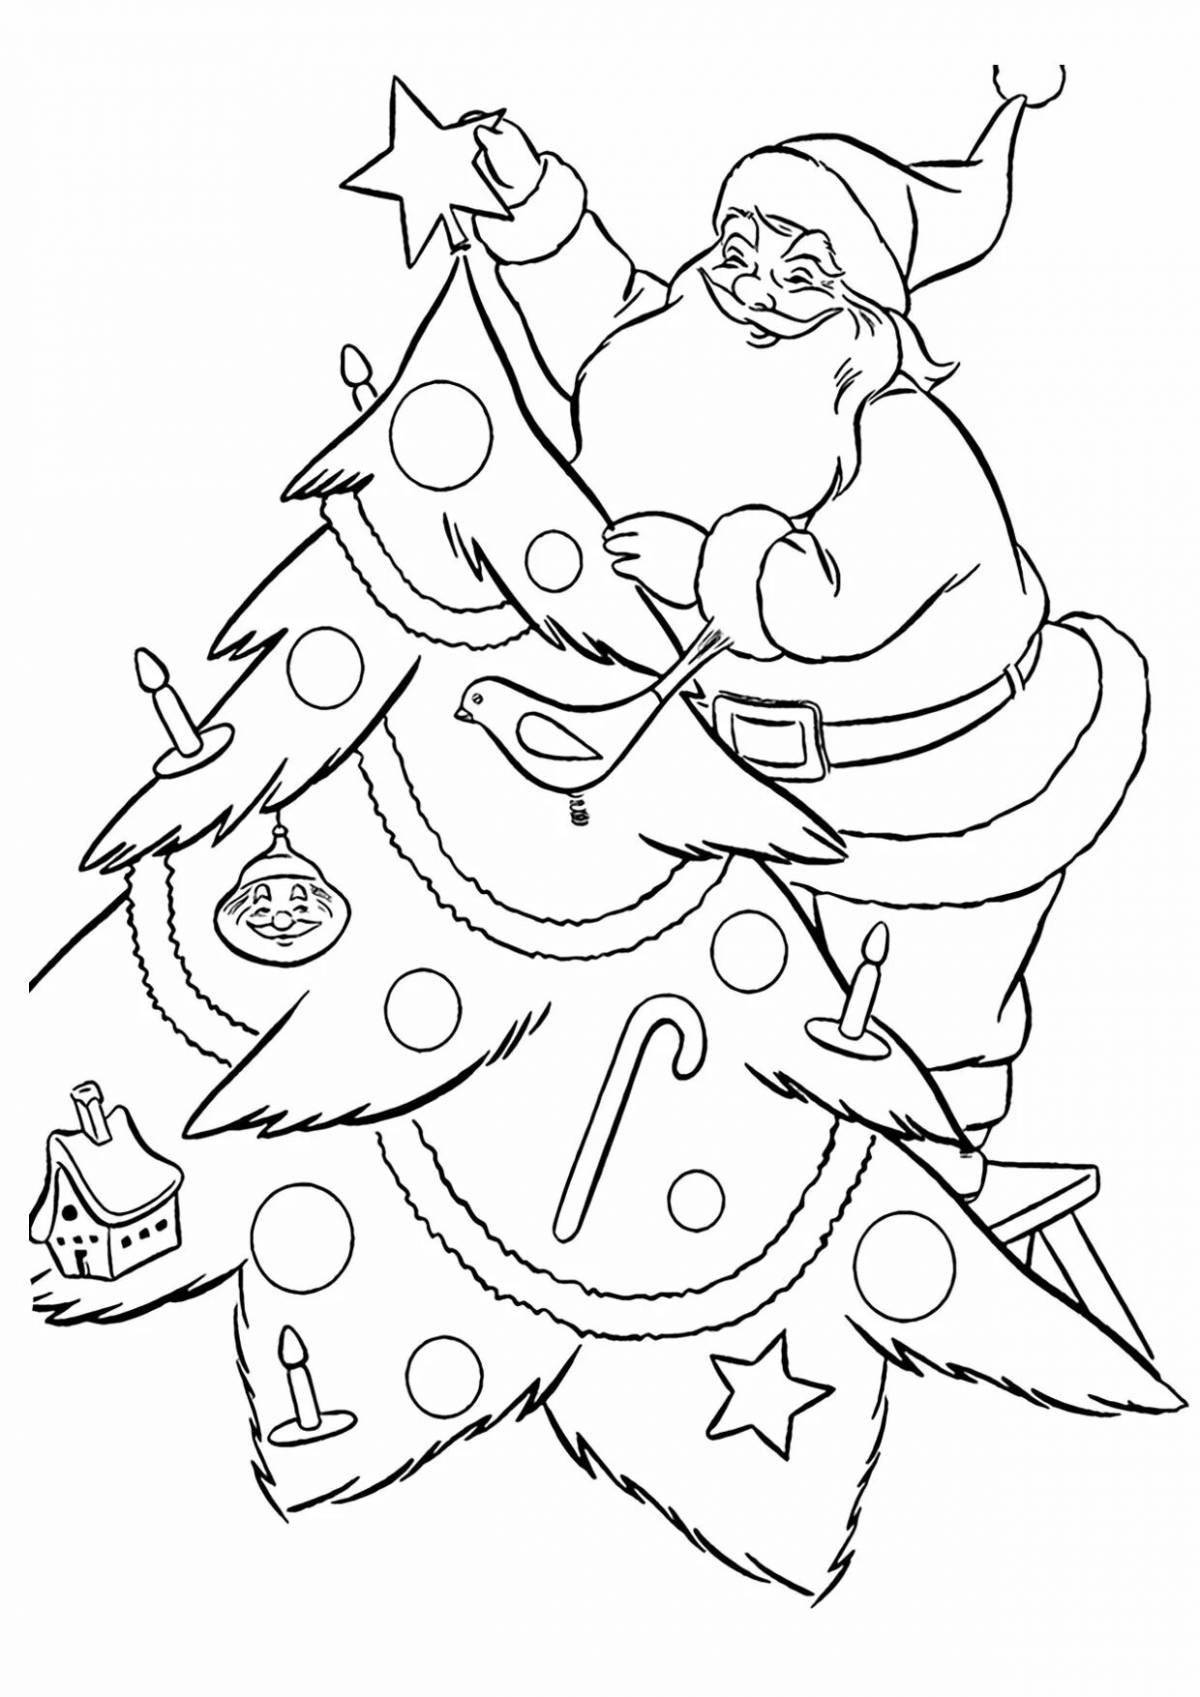 Sparkling Christmas tree coloring page